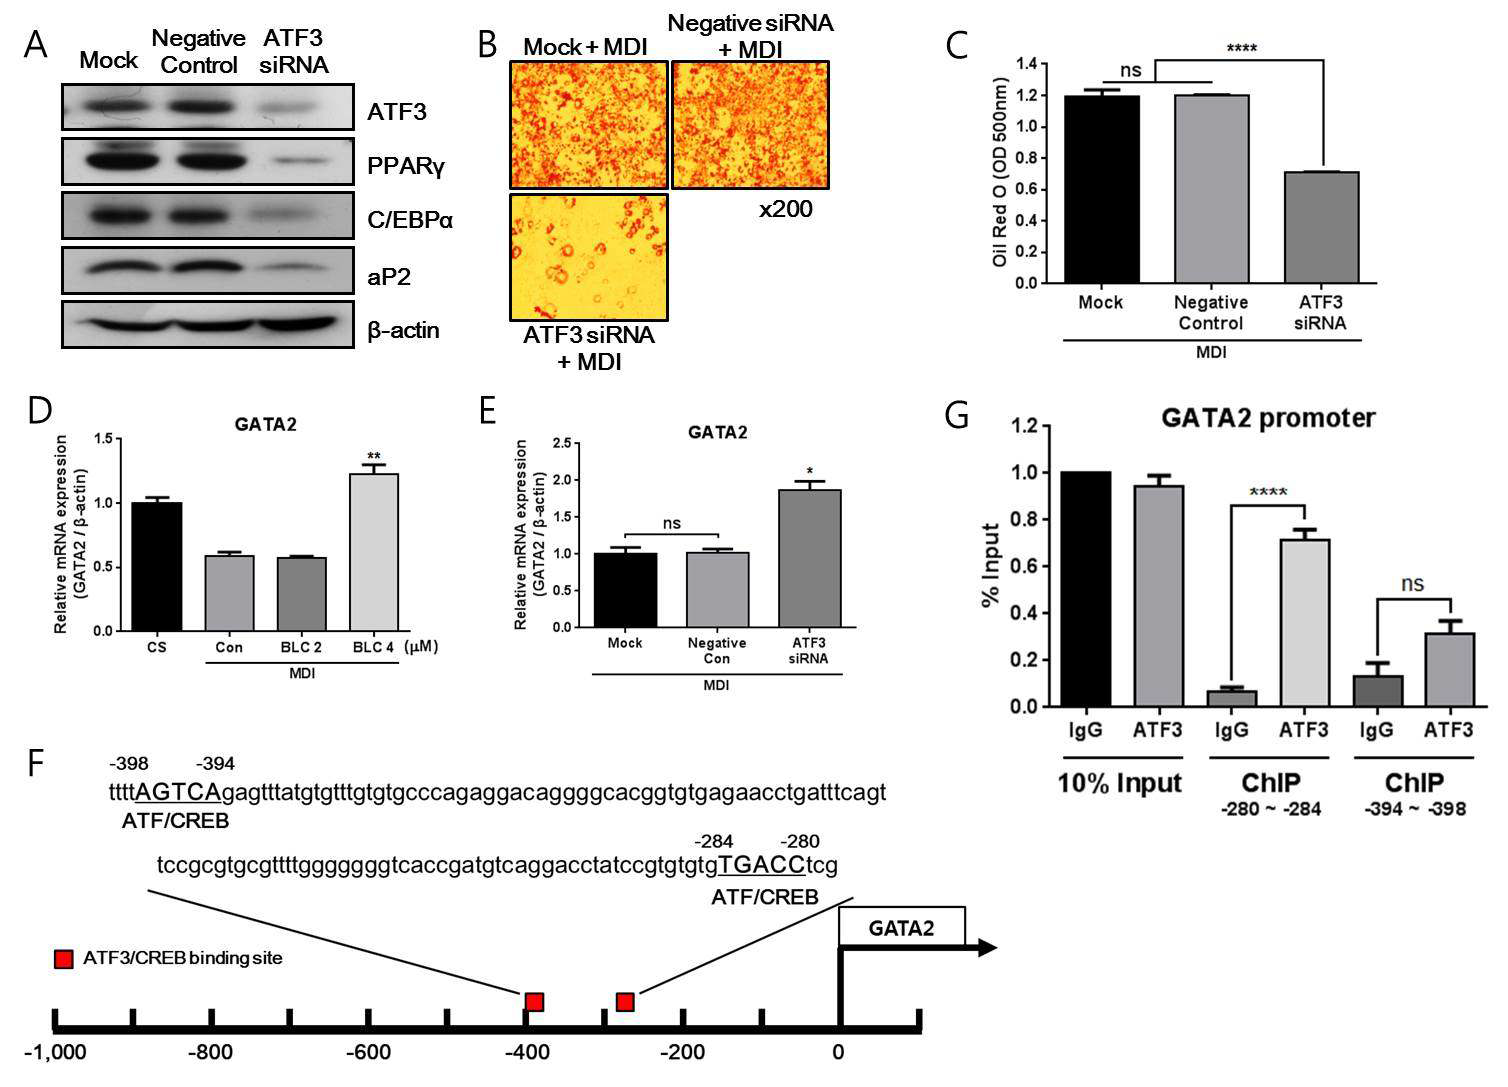 ATF3 induces adipogenesis via inhibition of GATA2 in 3T3-L1 cells.